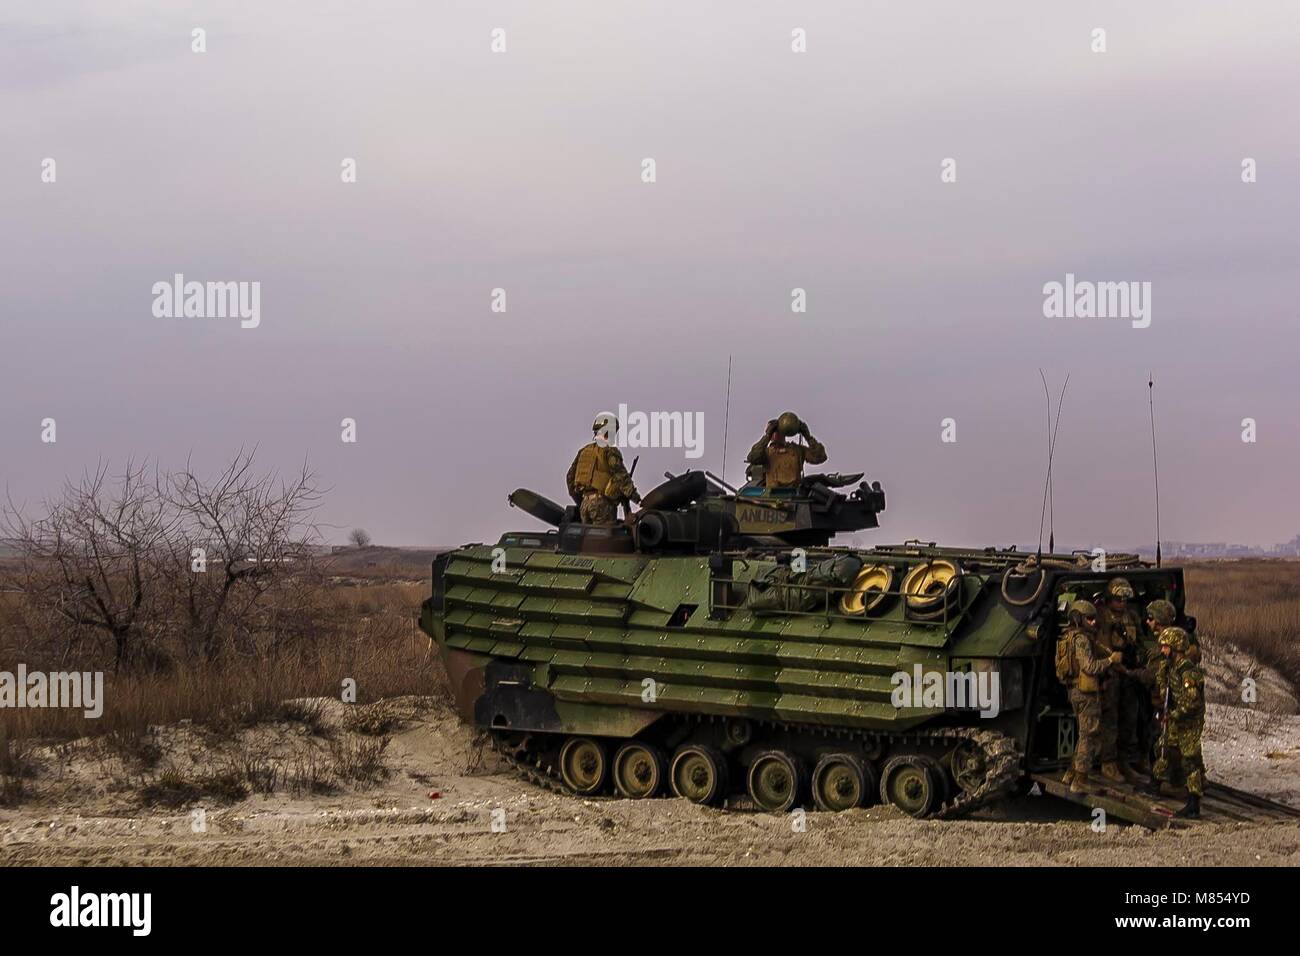 CAPU MIDIA TRAINING AREA, Romania (March 12, 2018) Members of the Romanian 307th Naval Infantry Battalion and Marines with Fox Company, Battalion Landing Team, 2nd Battalion, 6th Marine Regiment, 26th Marine Expeditionary Unit, mount an AAV-P7/A1 assault amphibious vehicle attached to Fox Co., BLT 2/6, 26th MEU, after a bilateral amphibious assault during exercise Spring Storm 2018, March 12, 2018. Spring Storm is a Romanian-led exercise in the Black Sea to enhance amphibious operations and staff interoperability between Romanian and U.S. naval forces. (U.S. Marine Corps photo by Staff Sgt. De Stock Photo